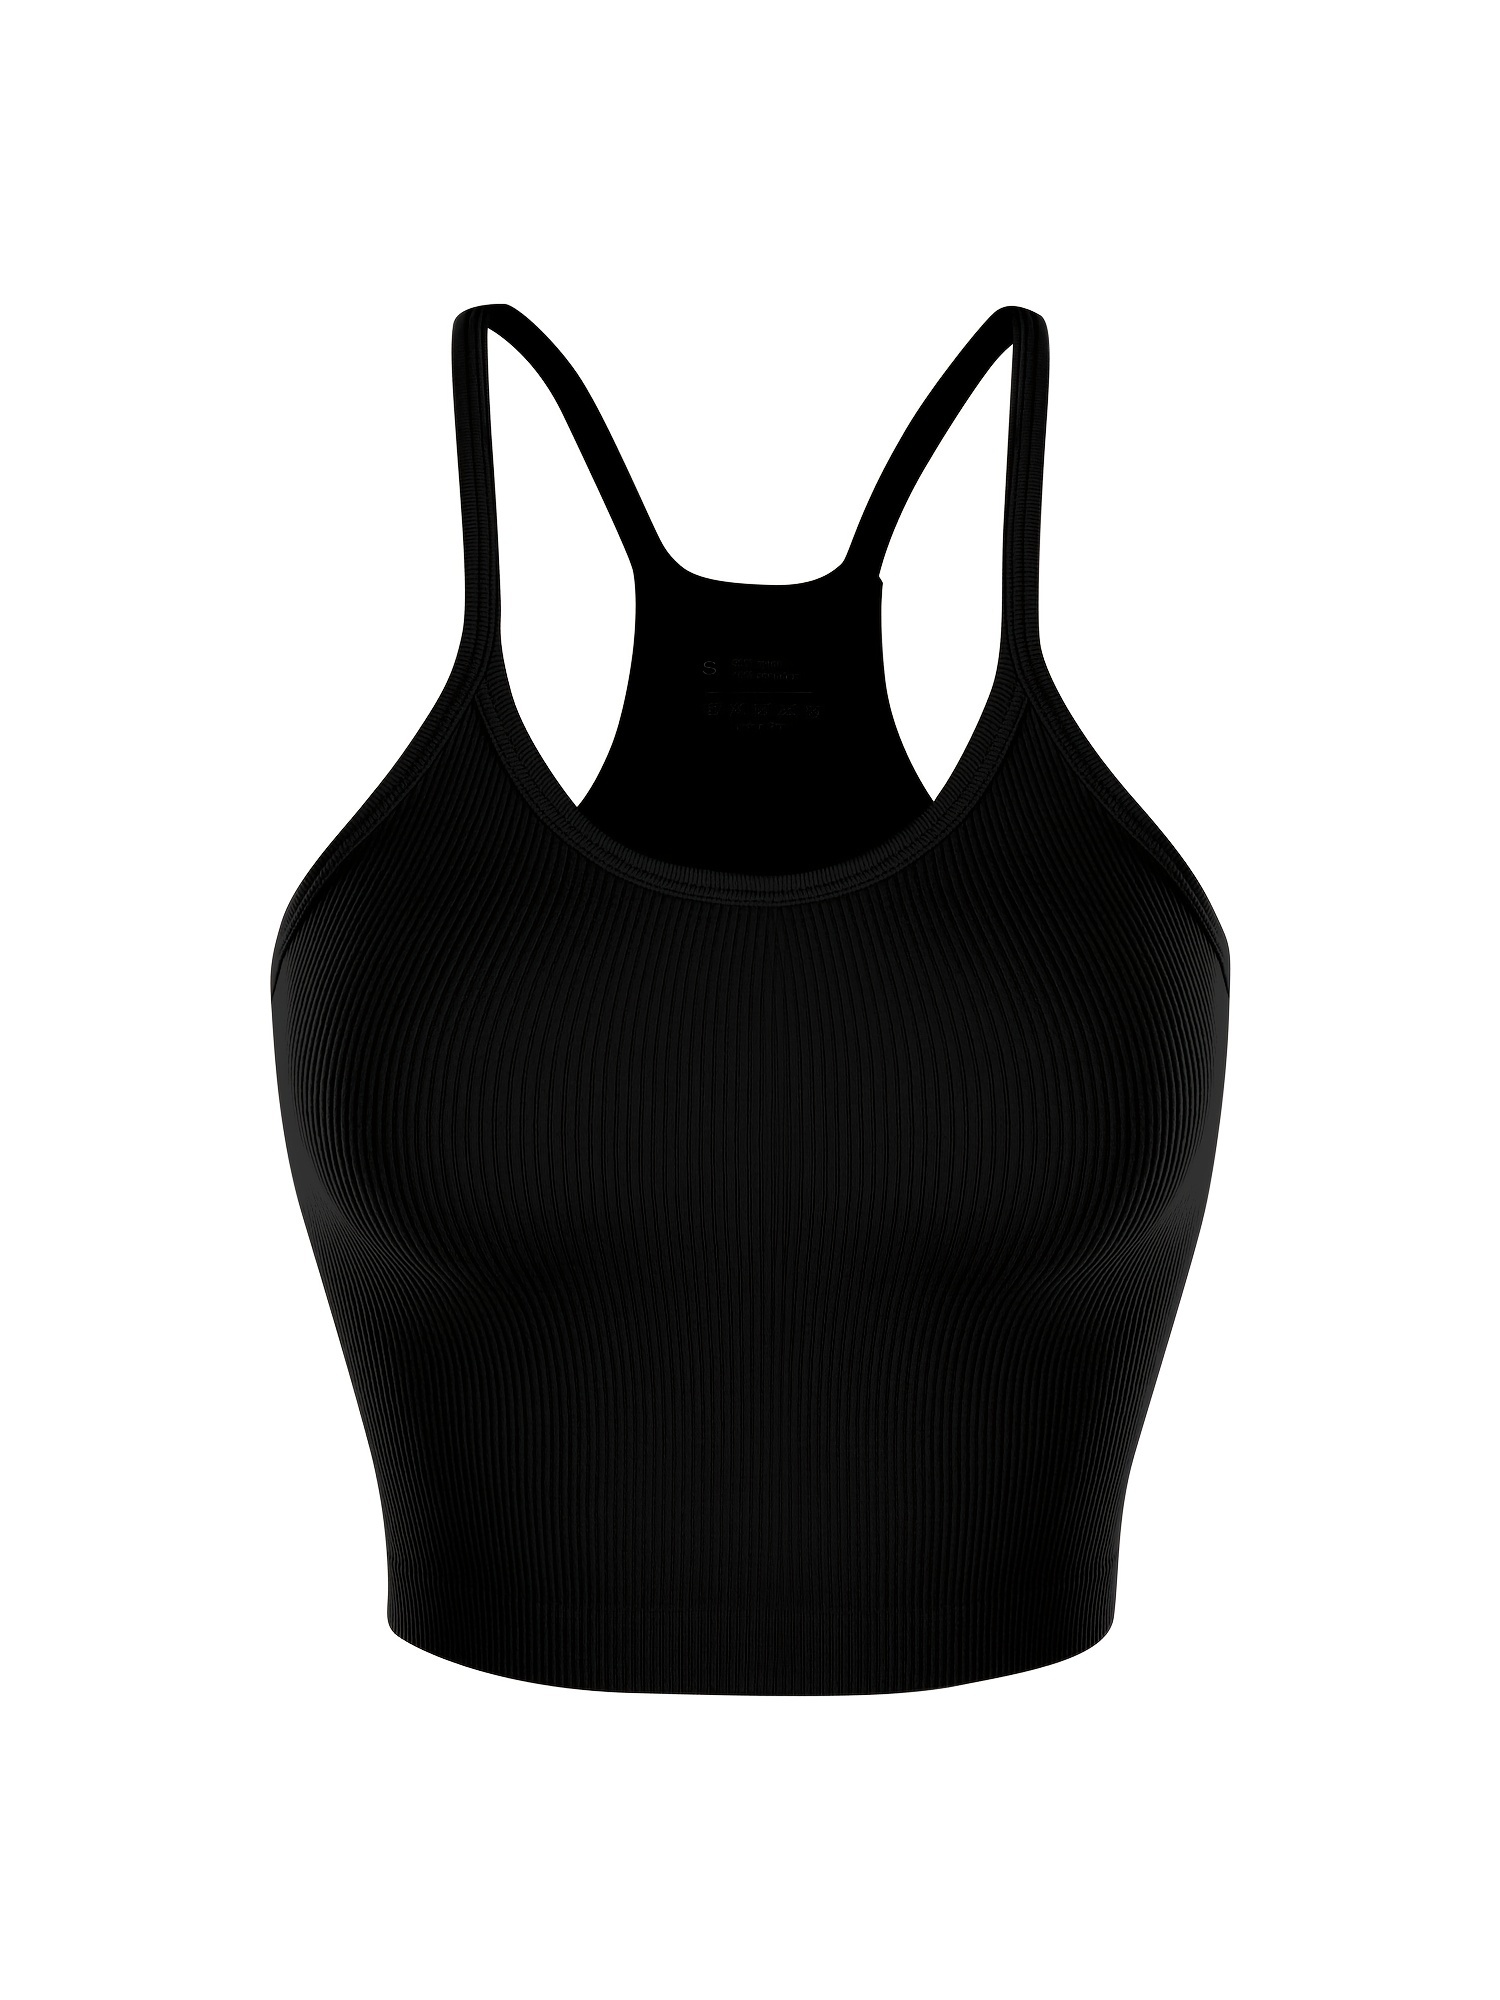 Seamless Ribbed Sports Bra For Women, Crop Tops Racer Back Tank Top,  Longline Workout Yoga Bra, Halter Neck Cropped Casual Top, No Pading Vest